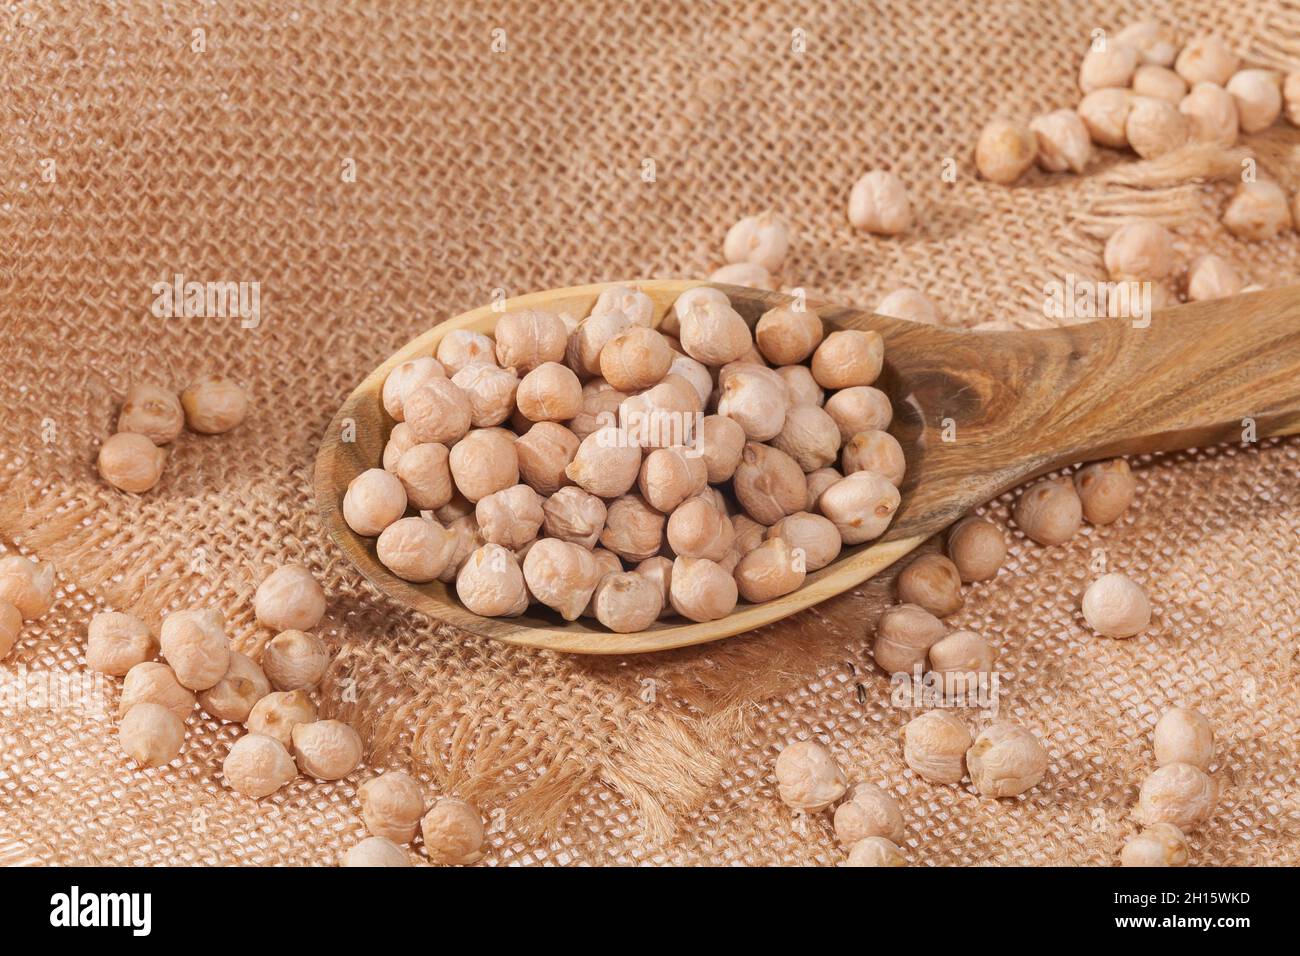 Cicer arietinum - Raw Grains Of Chickpea; Legume With Important Culinary And Nutritional Qualities Stock Photo